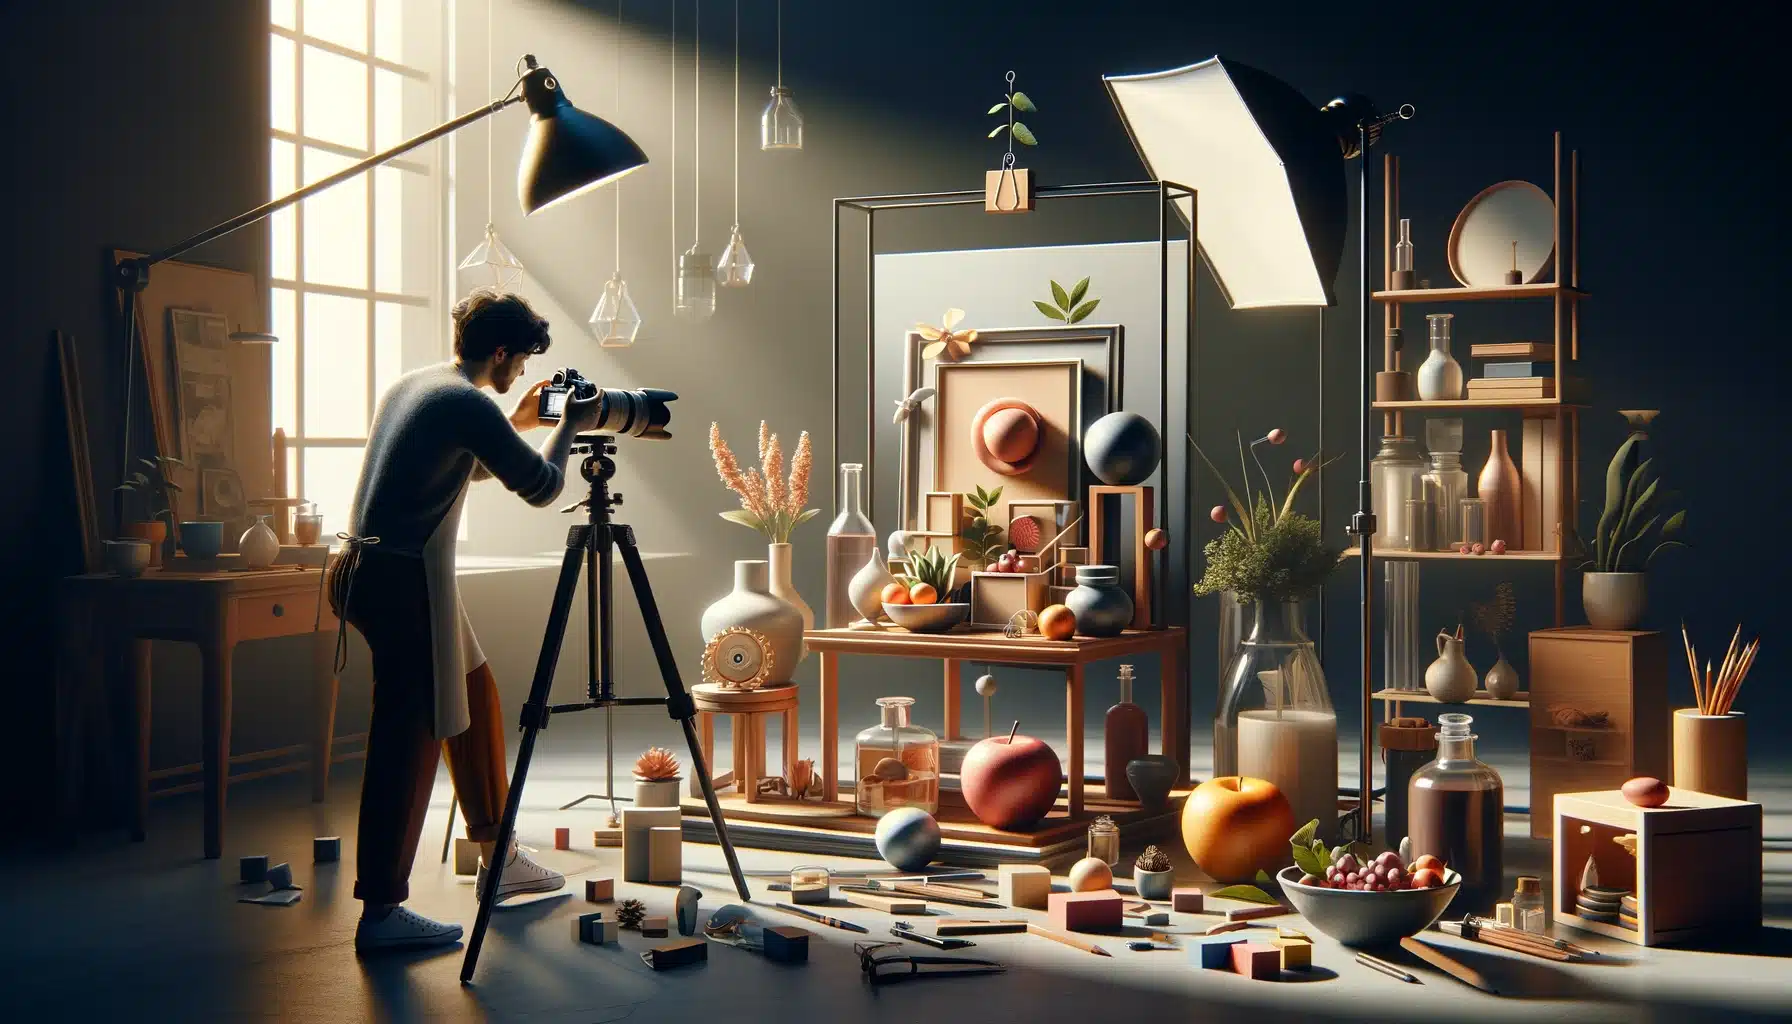 Photographer in studio adjusting camera on tripod to capture a still life setup demonstrating composition principles with varied textures, light, and colors.